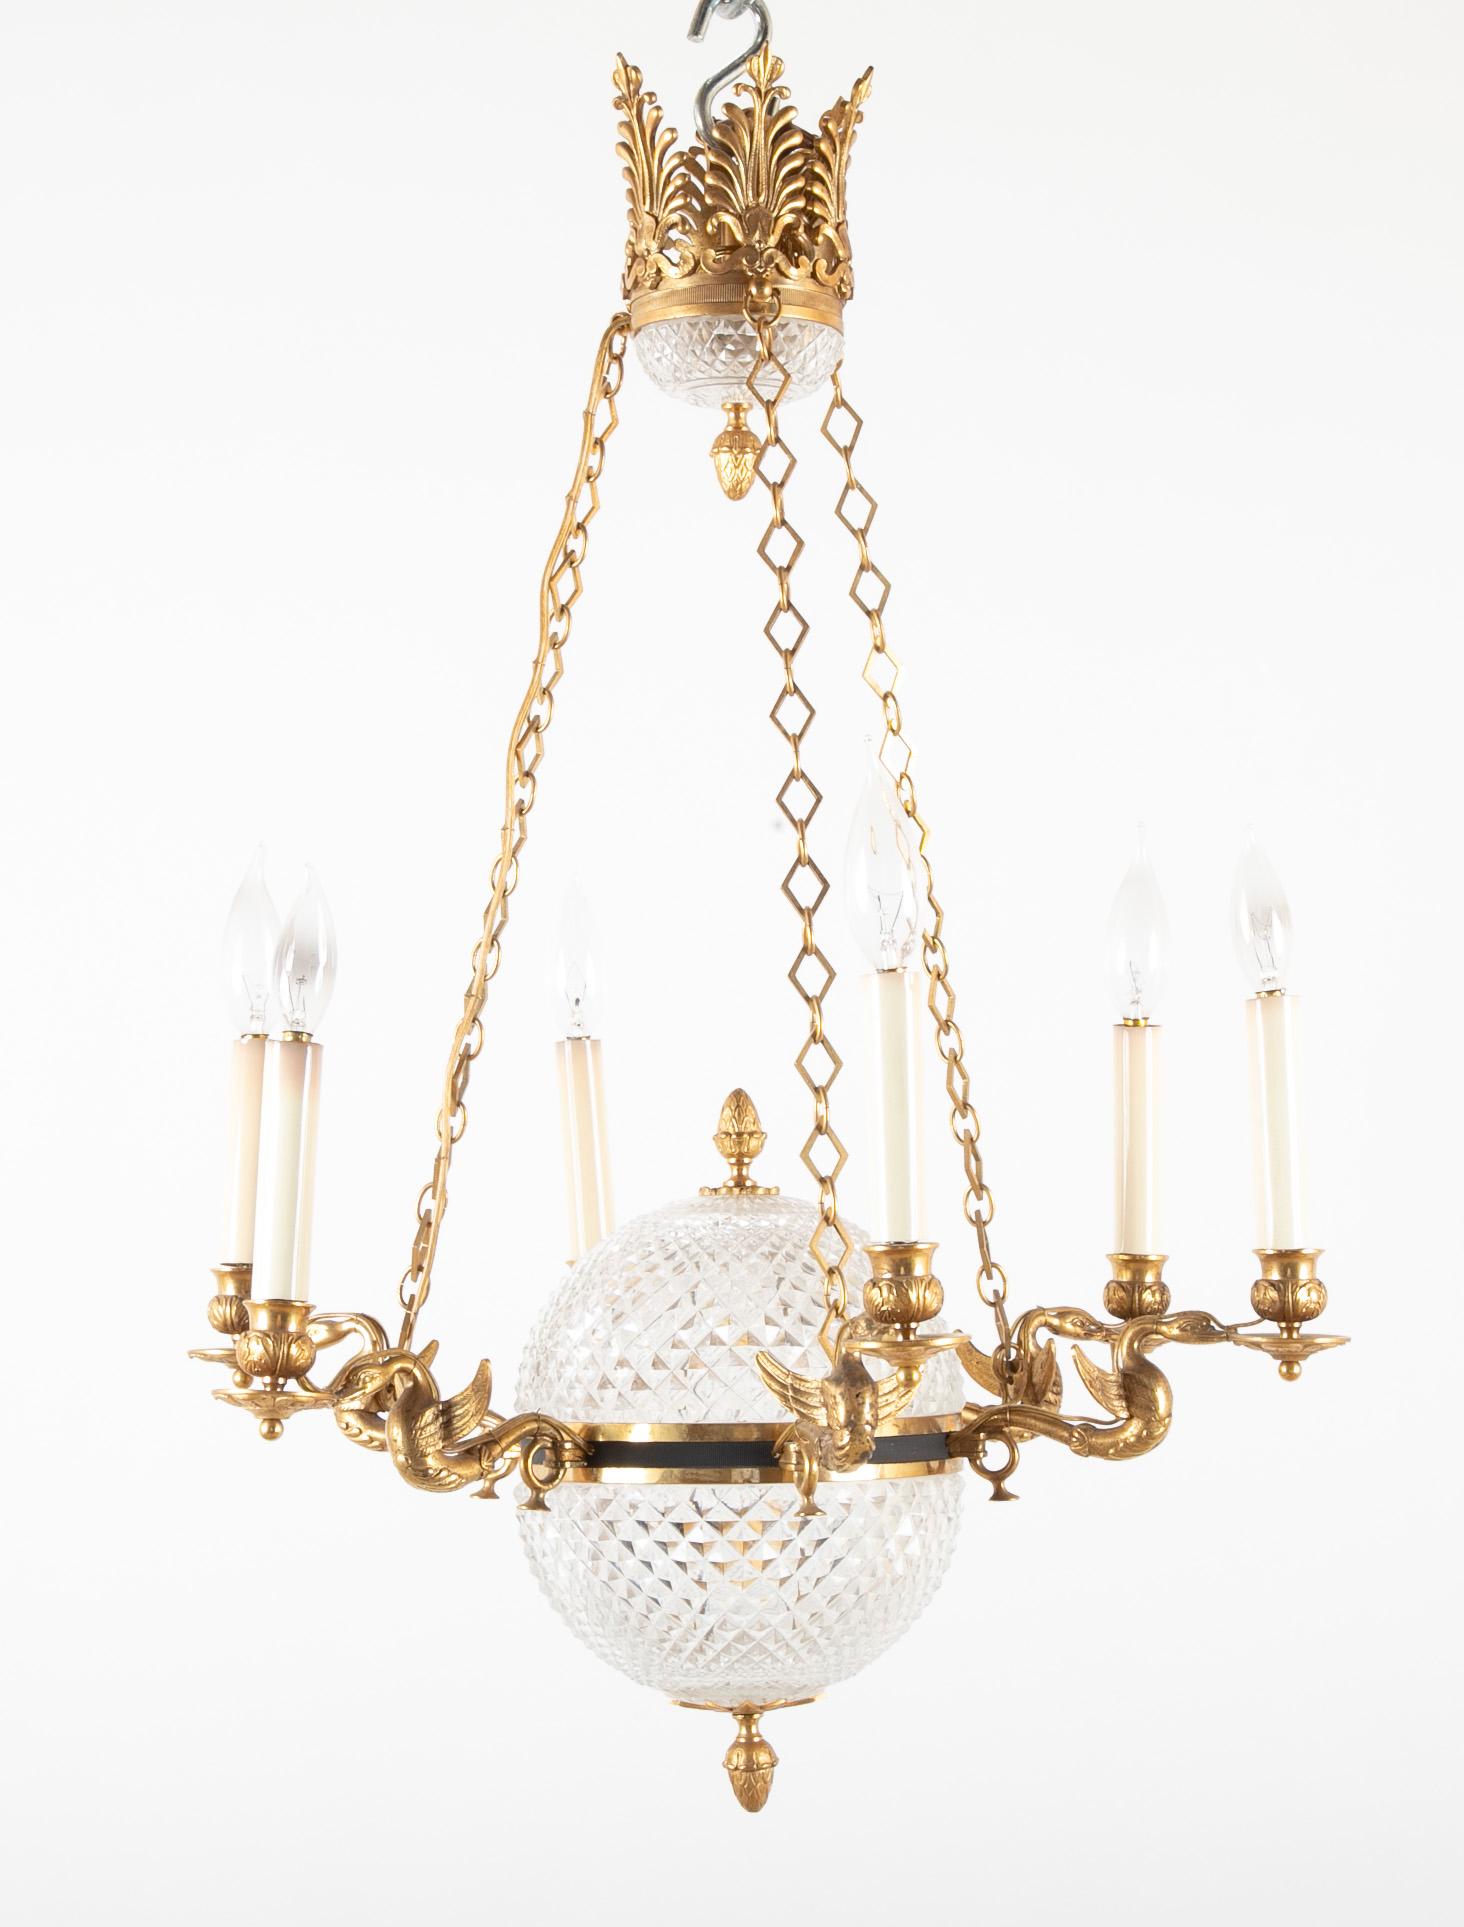 Cut crystal six-light chandelier with crystal central globe, gilded swan arms and elaborate crown.
 